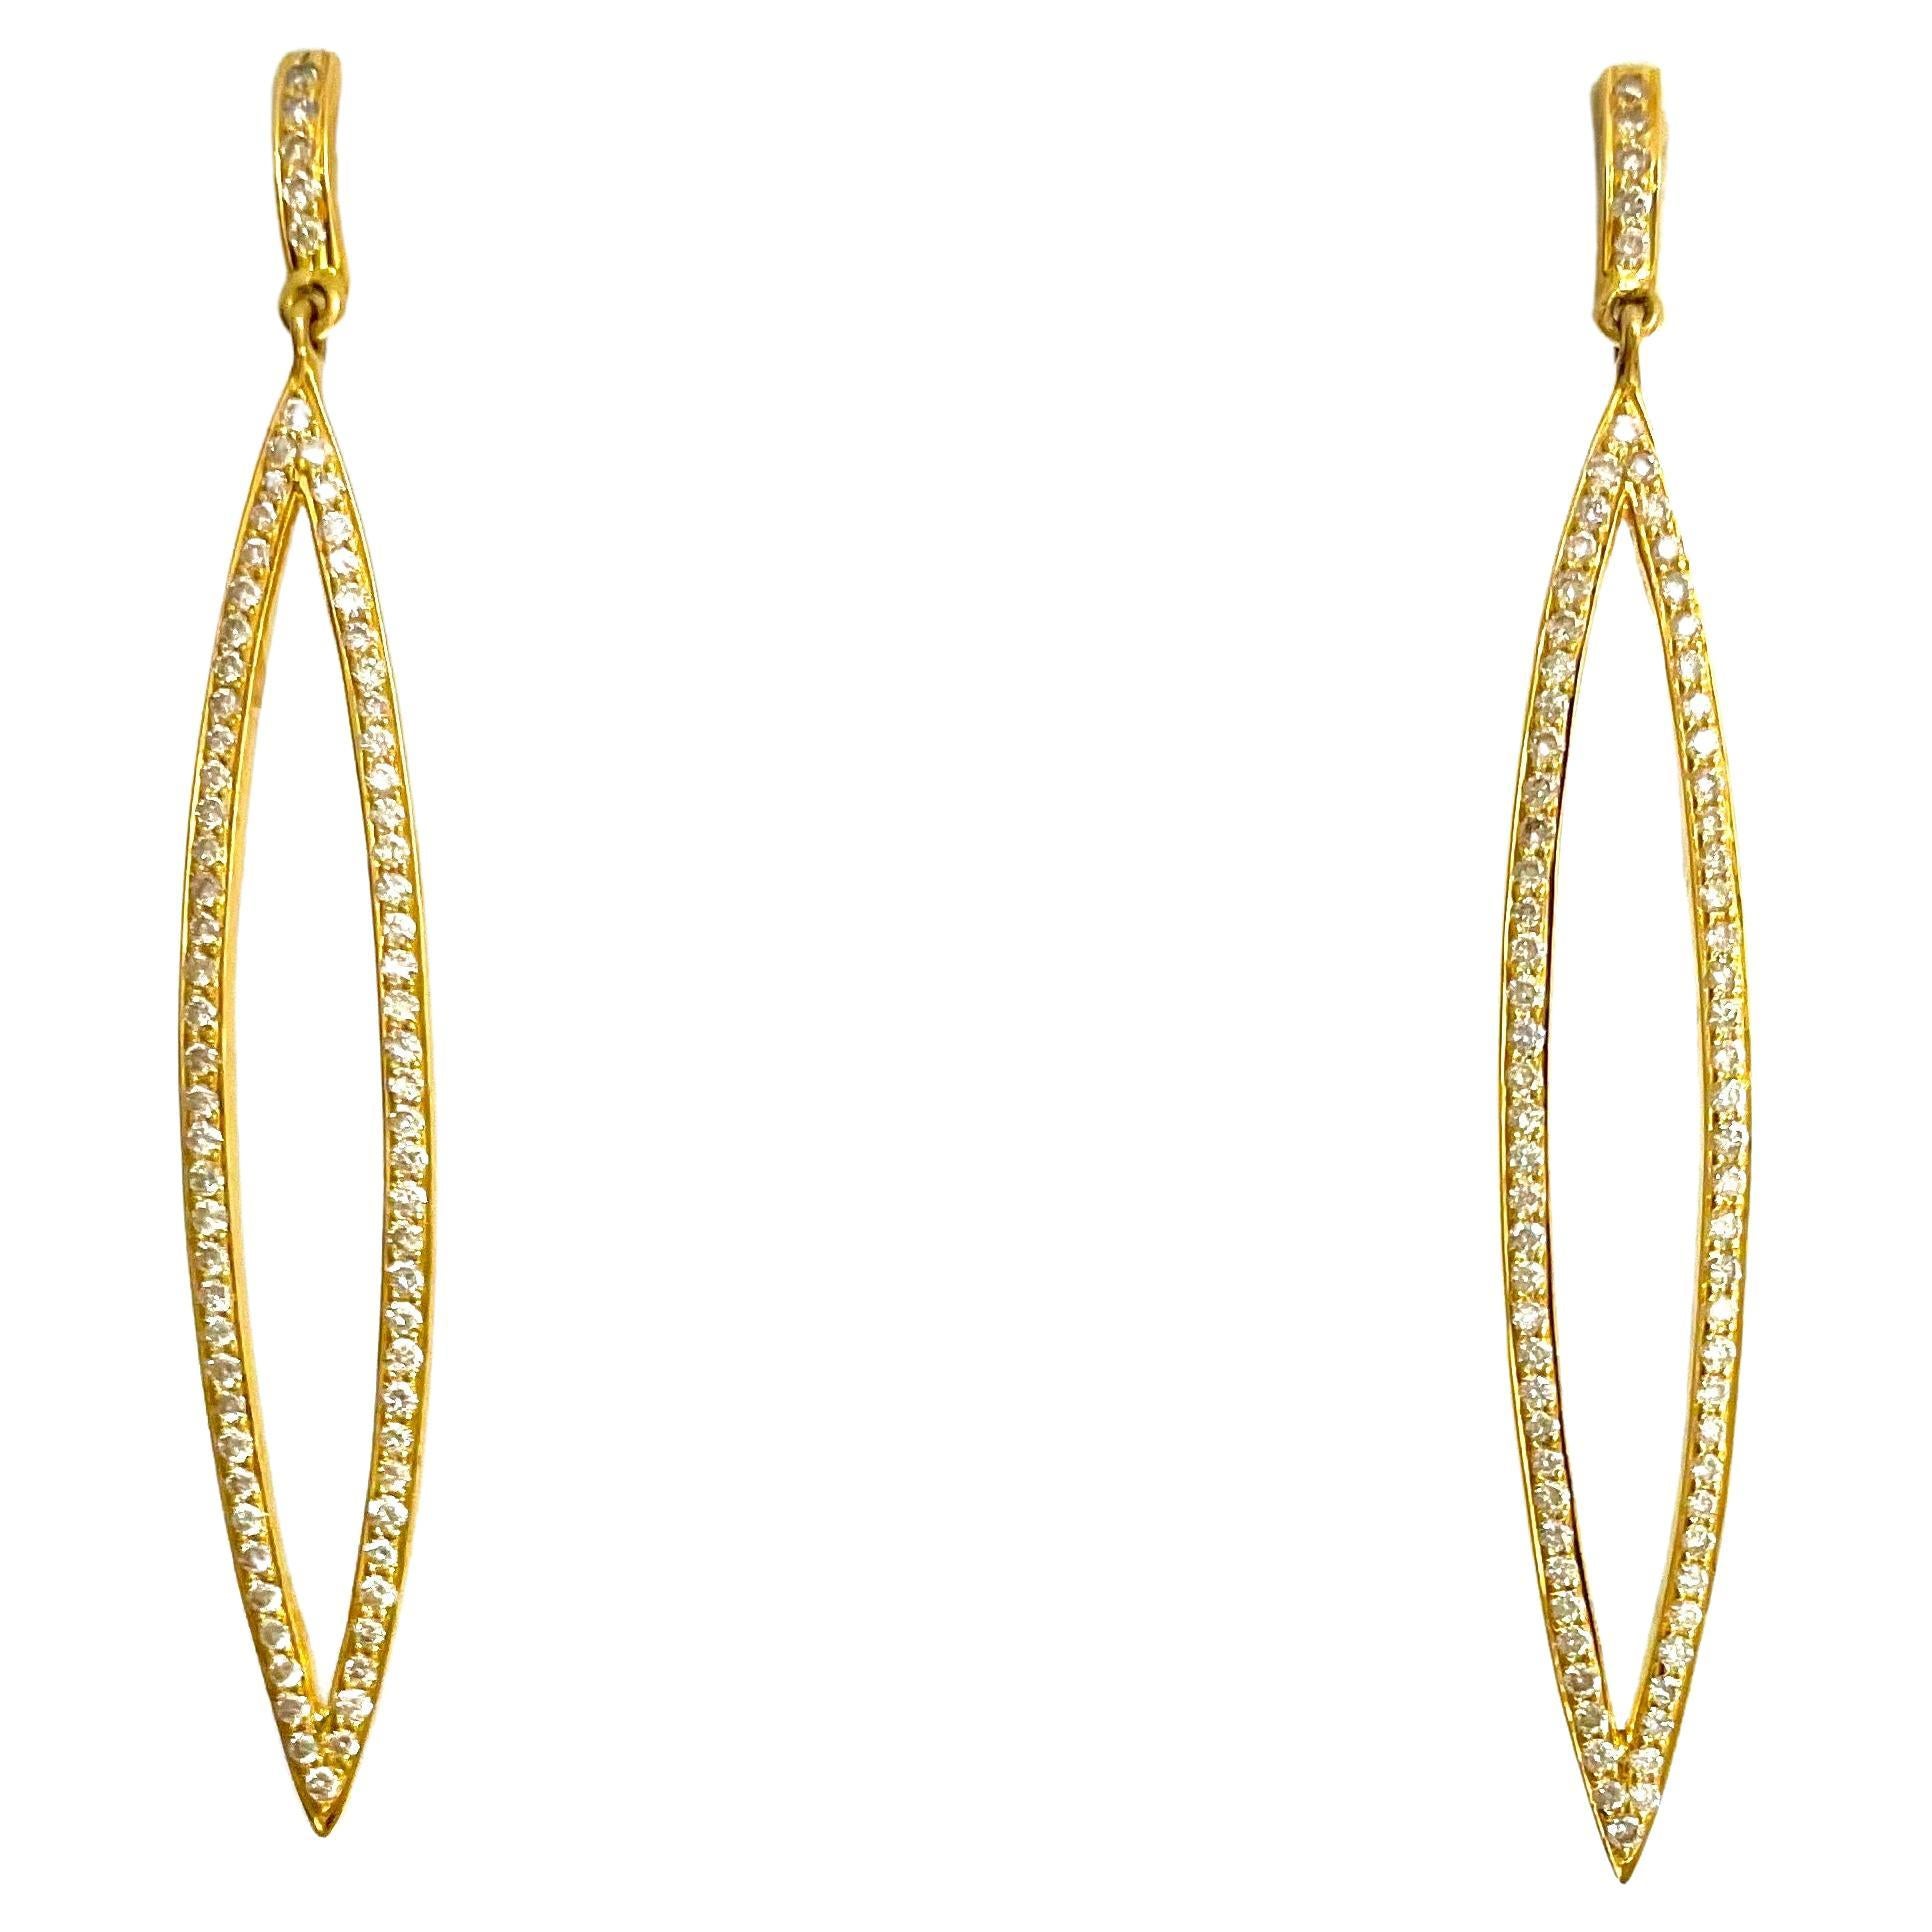 Description
These striking 18k yellow gold open marquise shape earrings with pave diamonds are the epitome of modern and classic style. 
Item # E3339

Materials and Weight
18k yellow gold
Pave diamonds 1.90cts
14k posts and jumbo backs

Dimensions